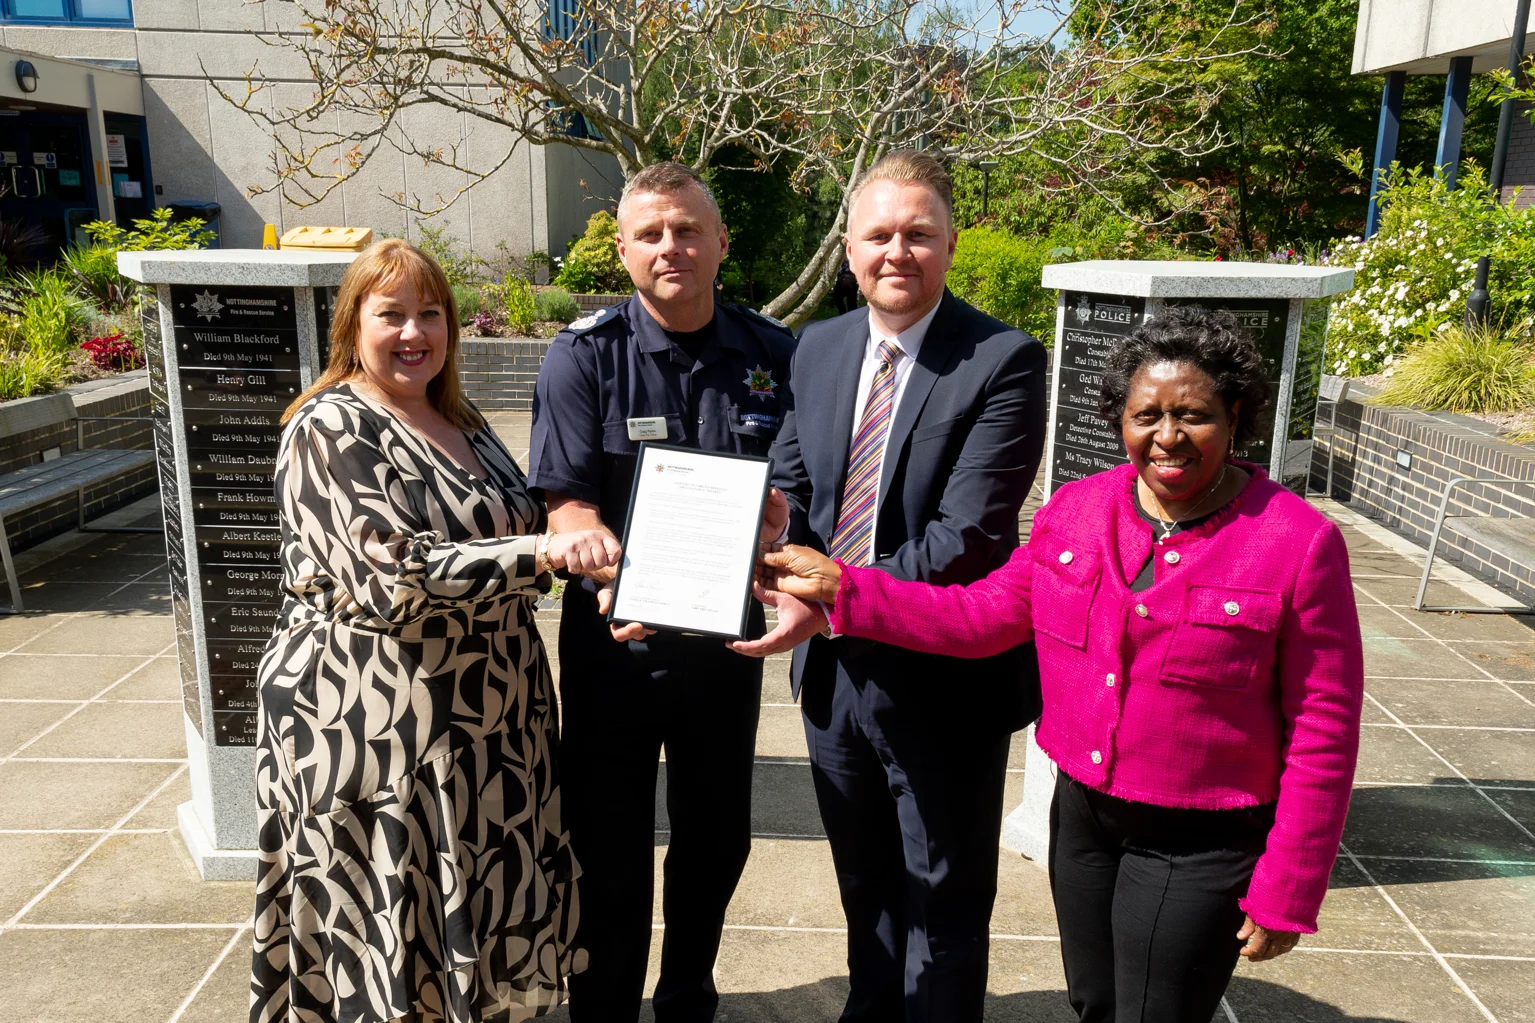 from left to right, the PCC, Chief Fire Officer, Chair of the Fire Authority, and Deputy Chair, stand in a line holding a certificate